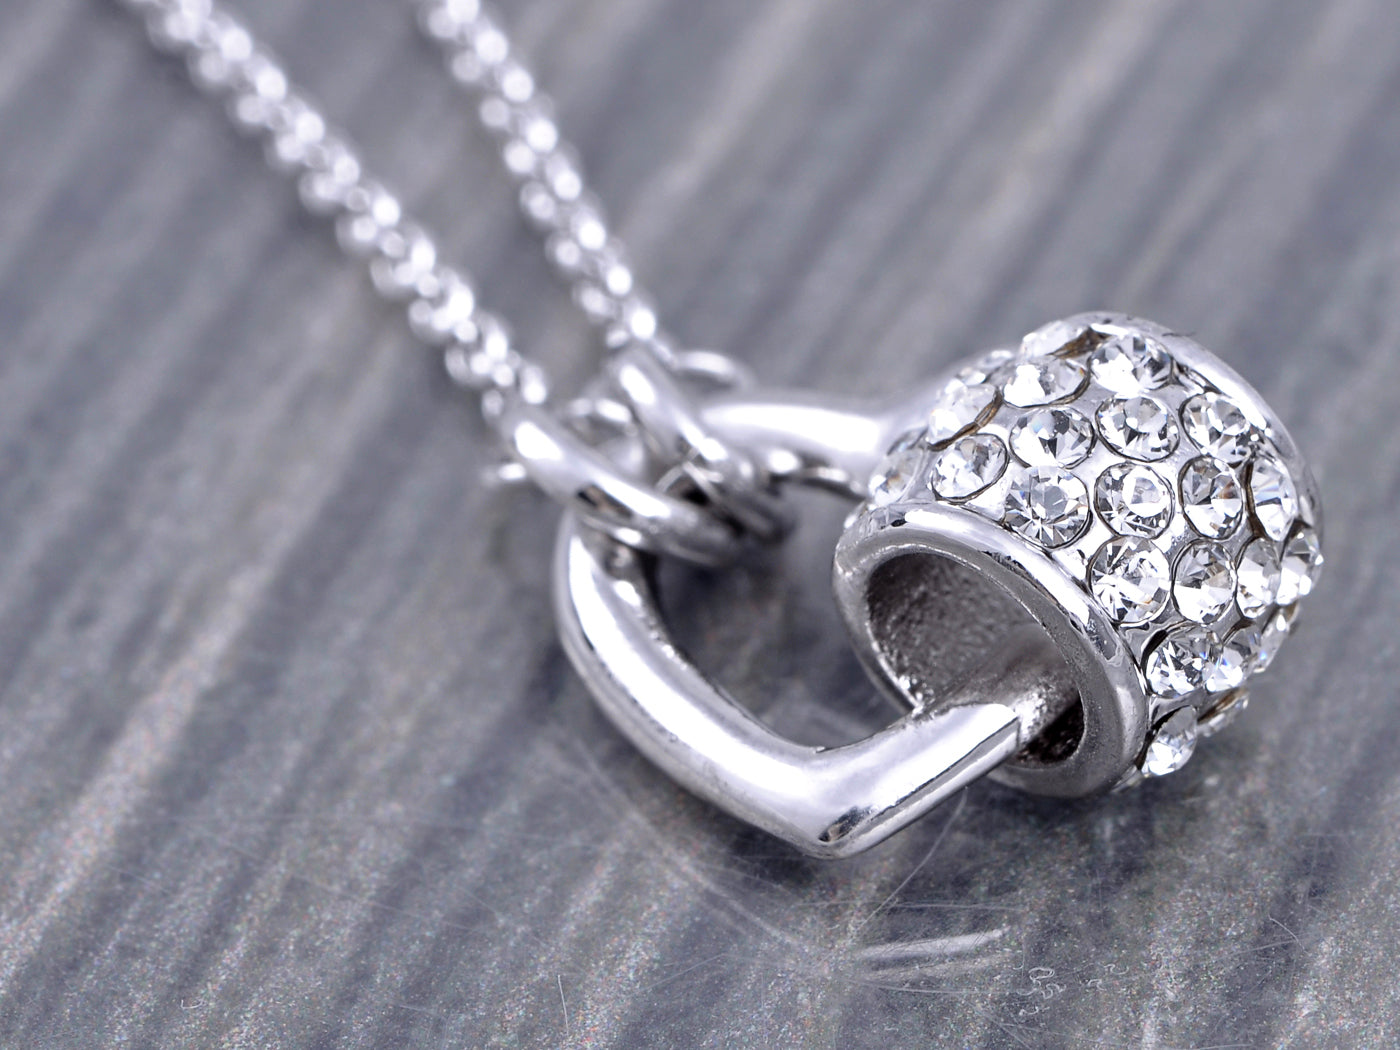 Swarovski Crystal Silver Element Classic Love Heart Shaped Pendant Necklace